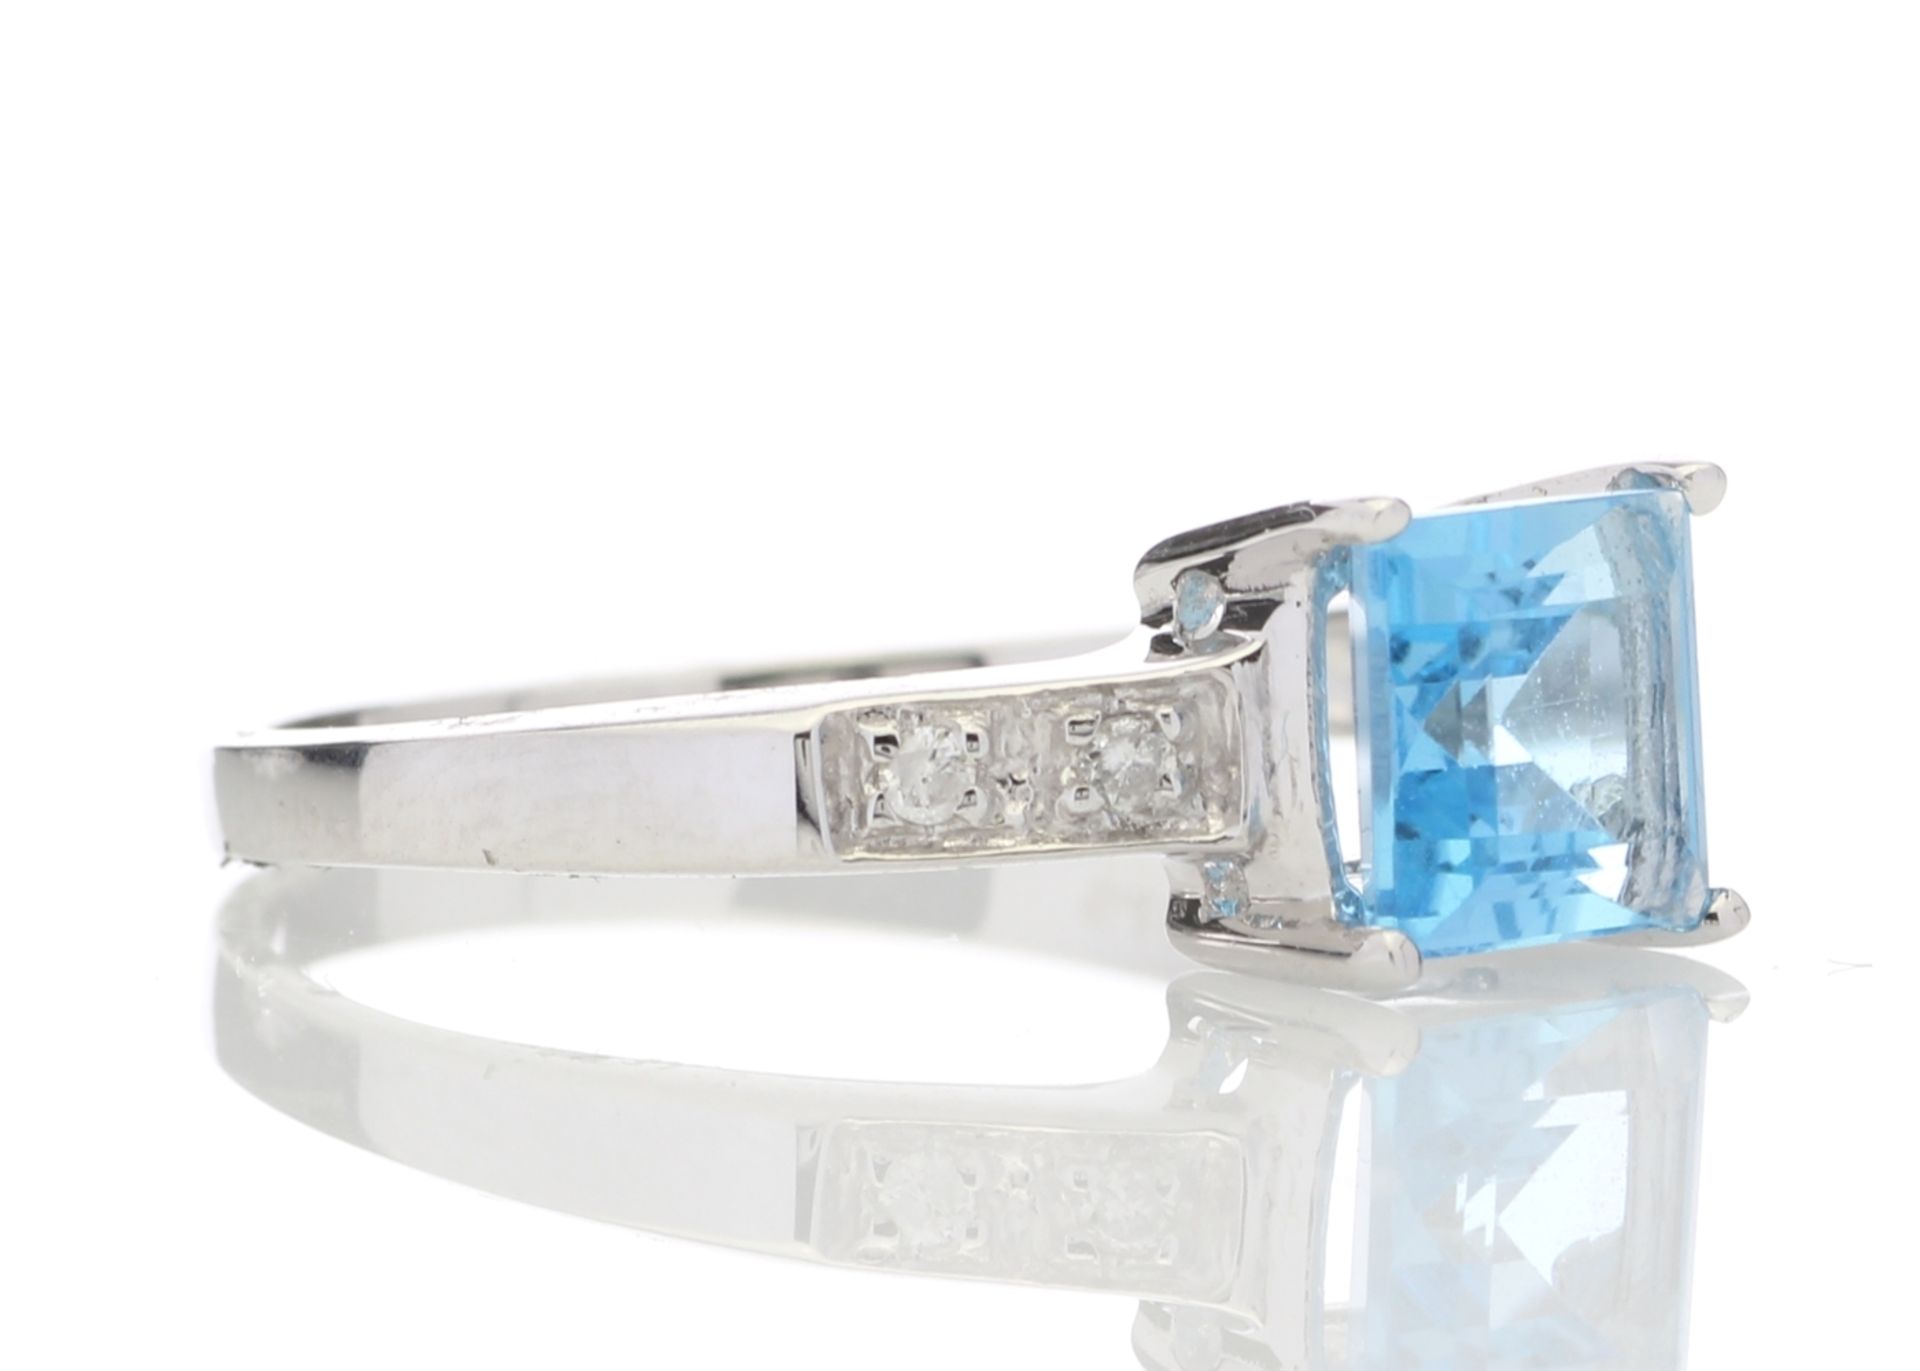 9k White Gold Diamond And Blue Topaz Ring 0.04 Carats - Image 4 of 5